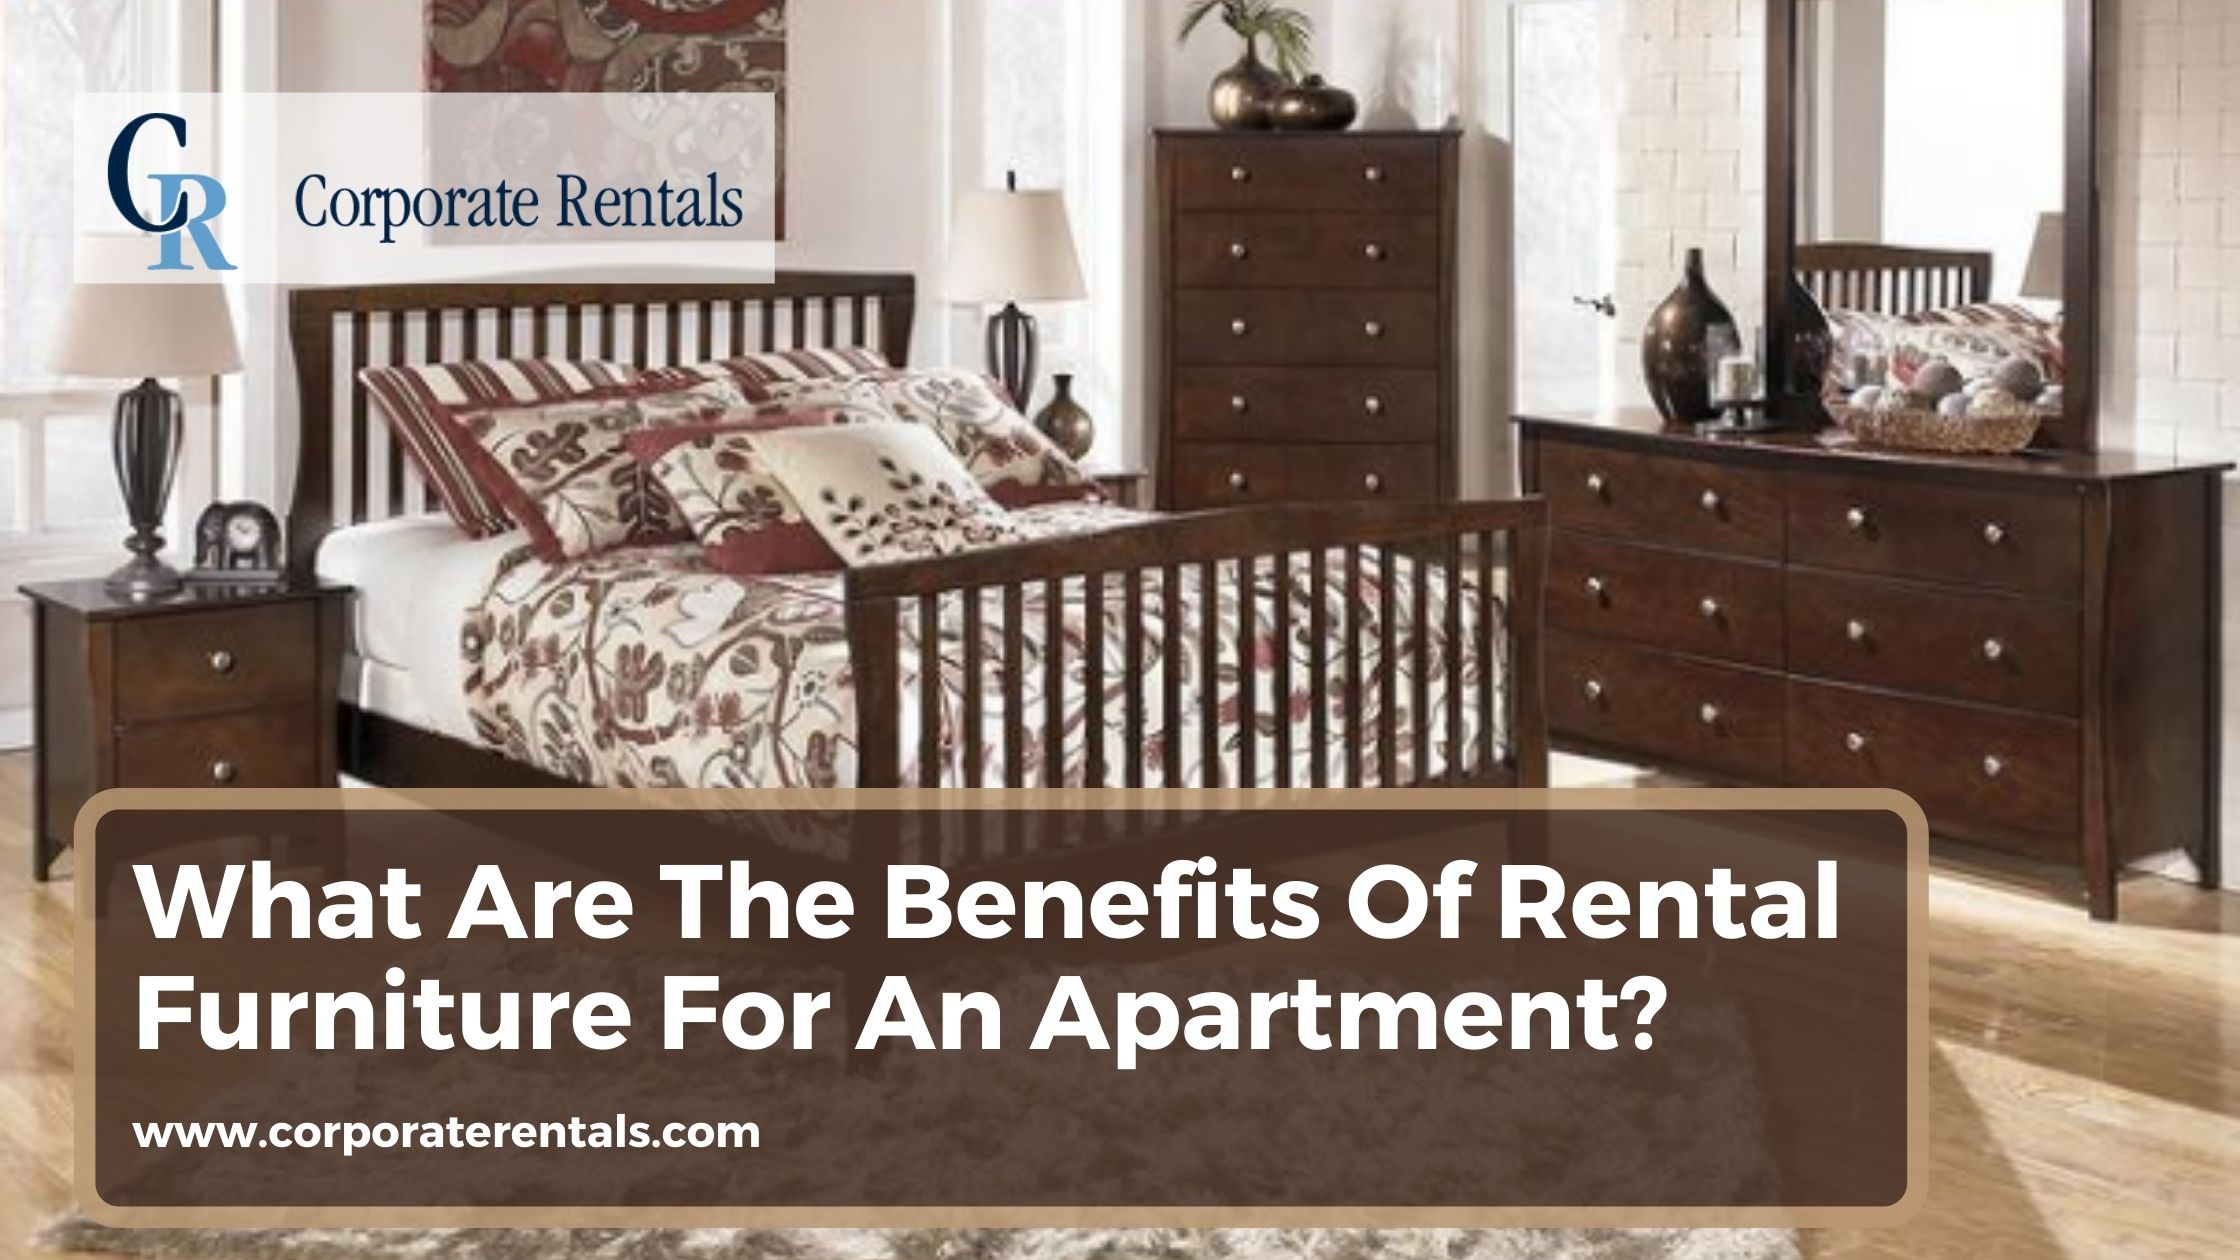 What Are The Benefits Of Rental Furniture For An Apartment?